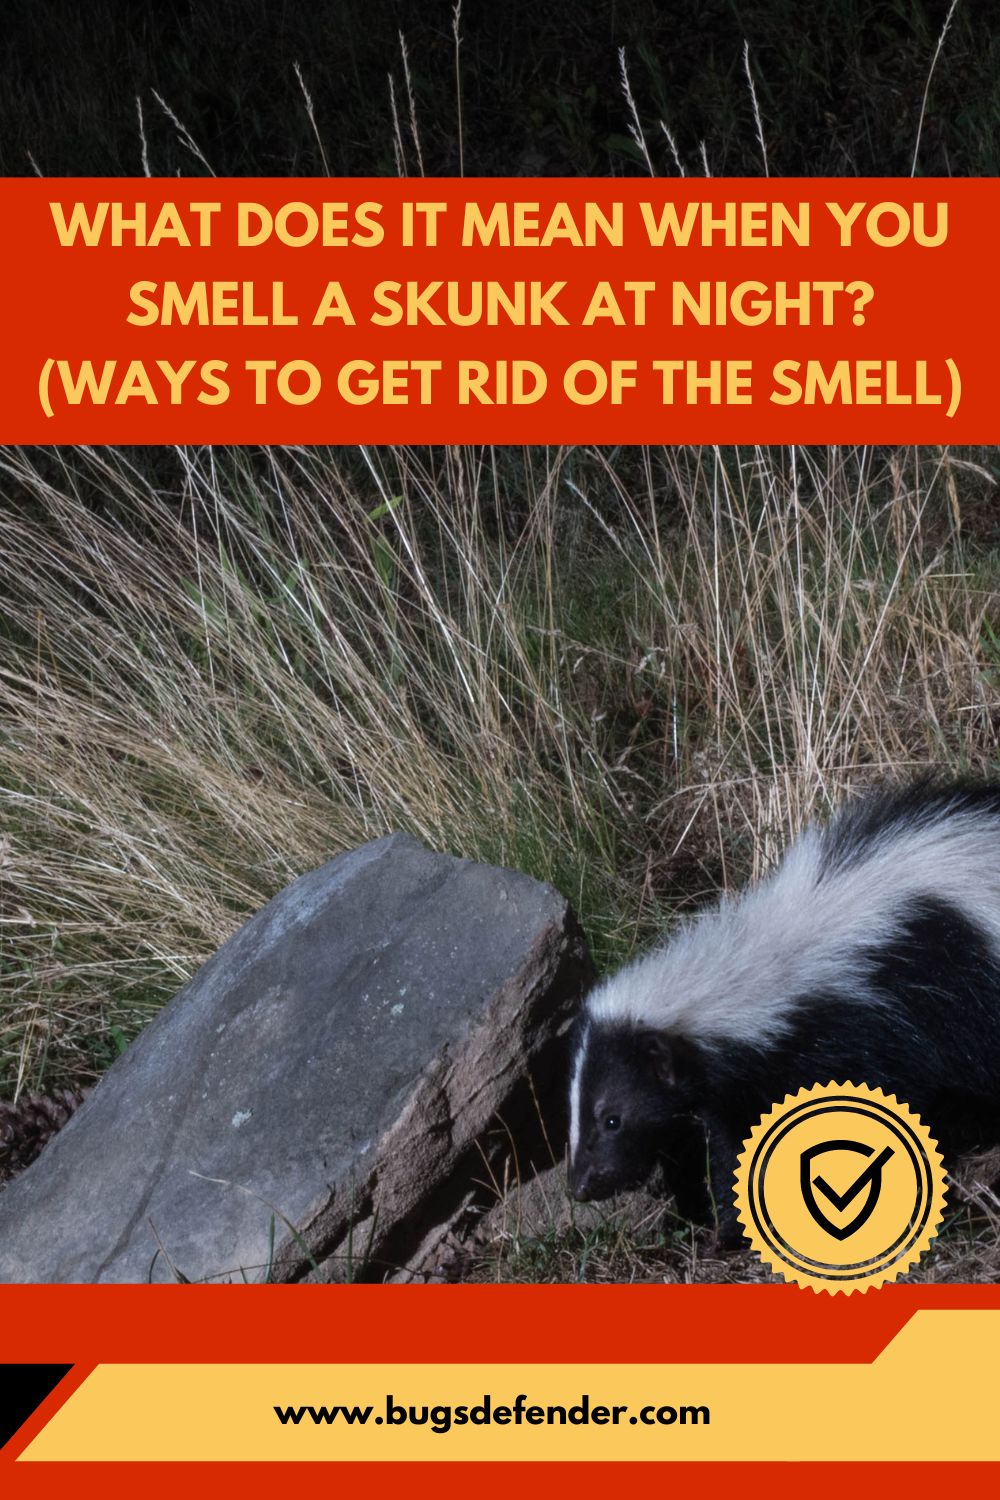 What Does It Mean When You Smell A Skunk At Night? (Ways To Get Rid Of The Smell) pin 1